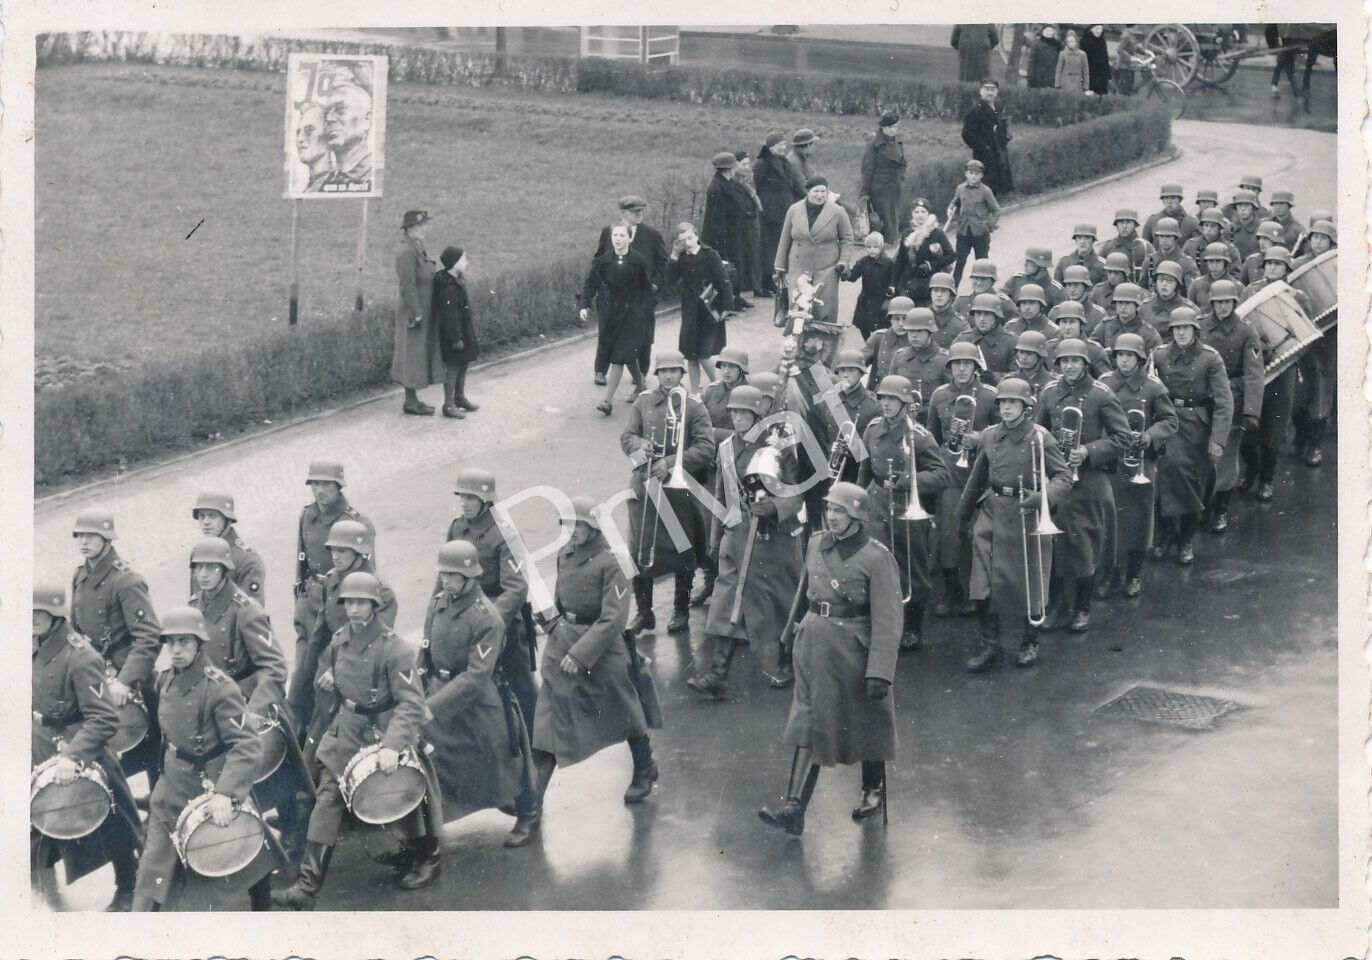 Photo Wk II Armed Forces Soldiers Music Corps Parade Festtag 5 I. R. 52 K1.85